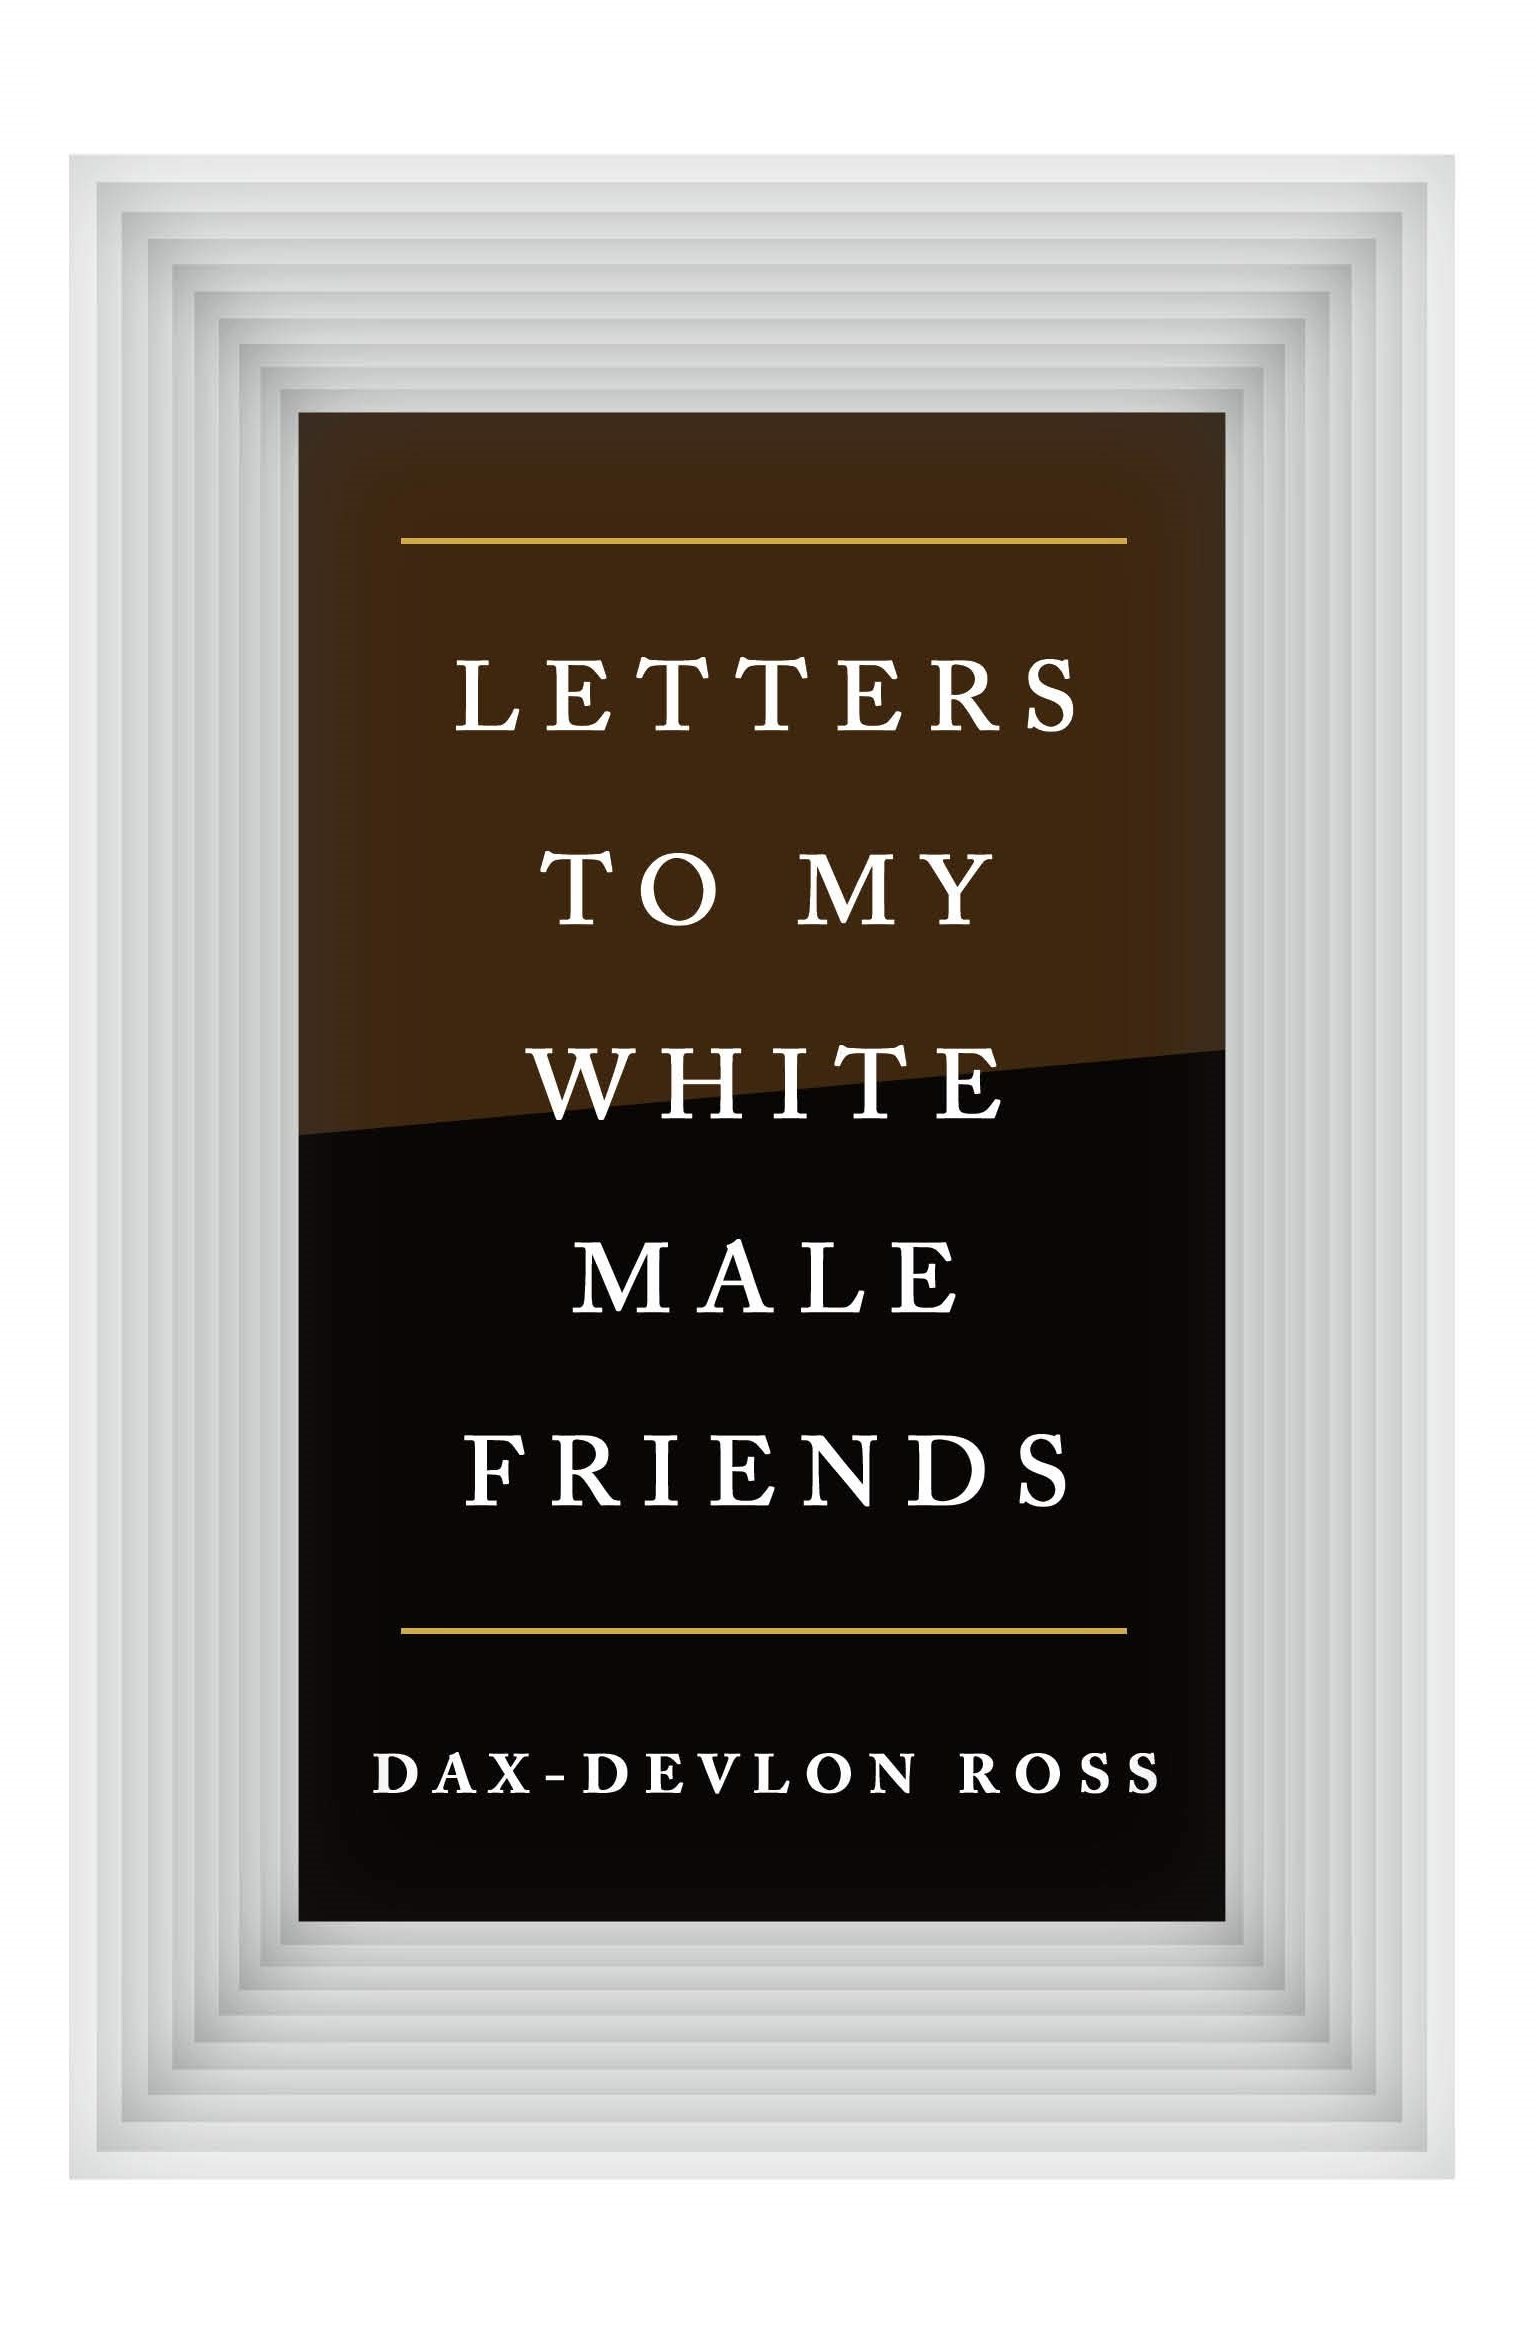 Letters to My White Male Friends (hardcover)